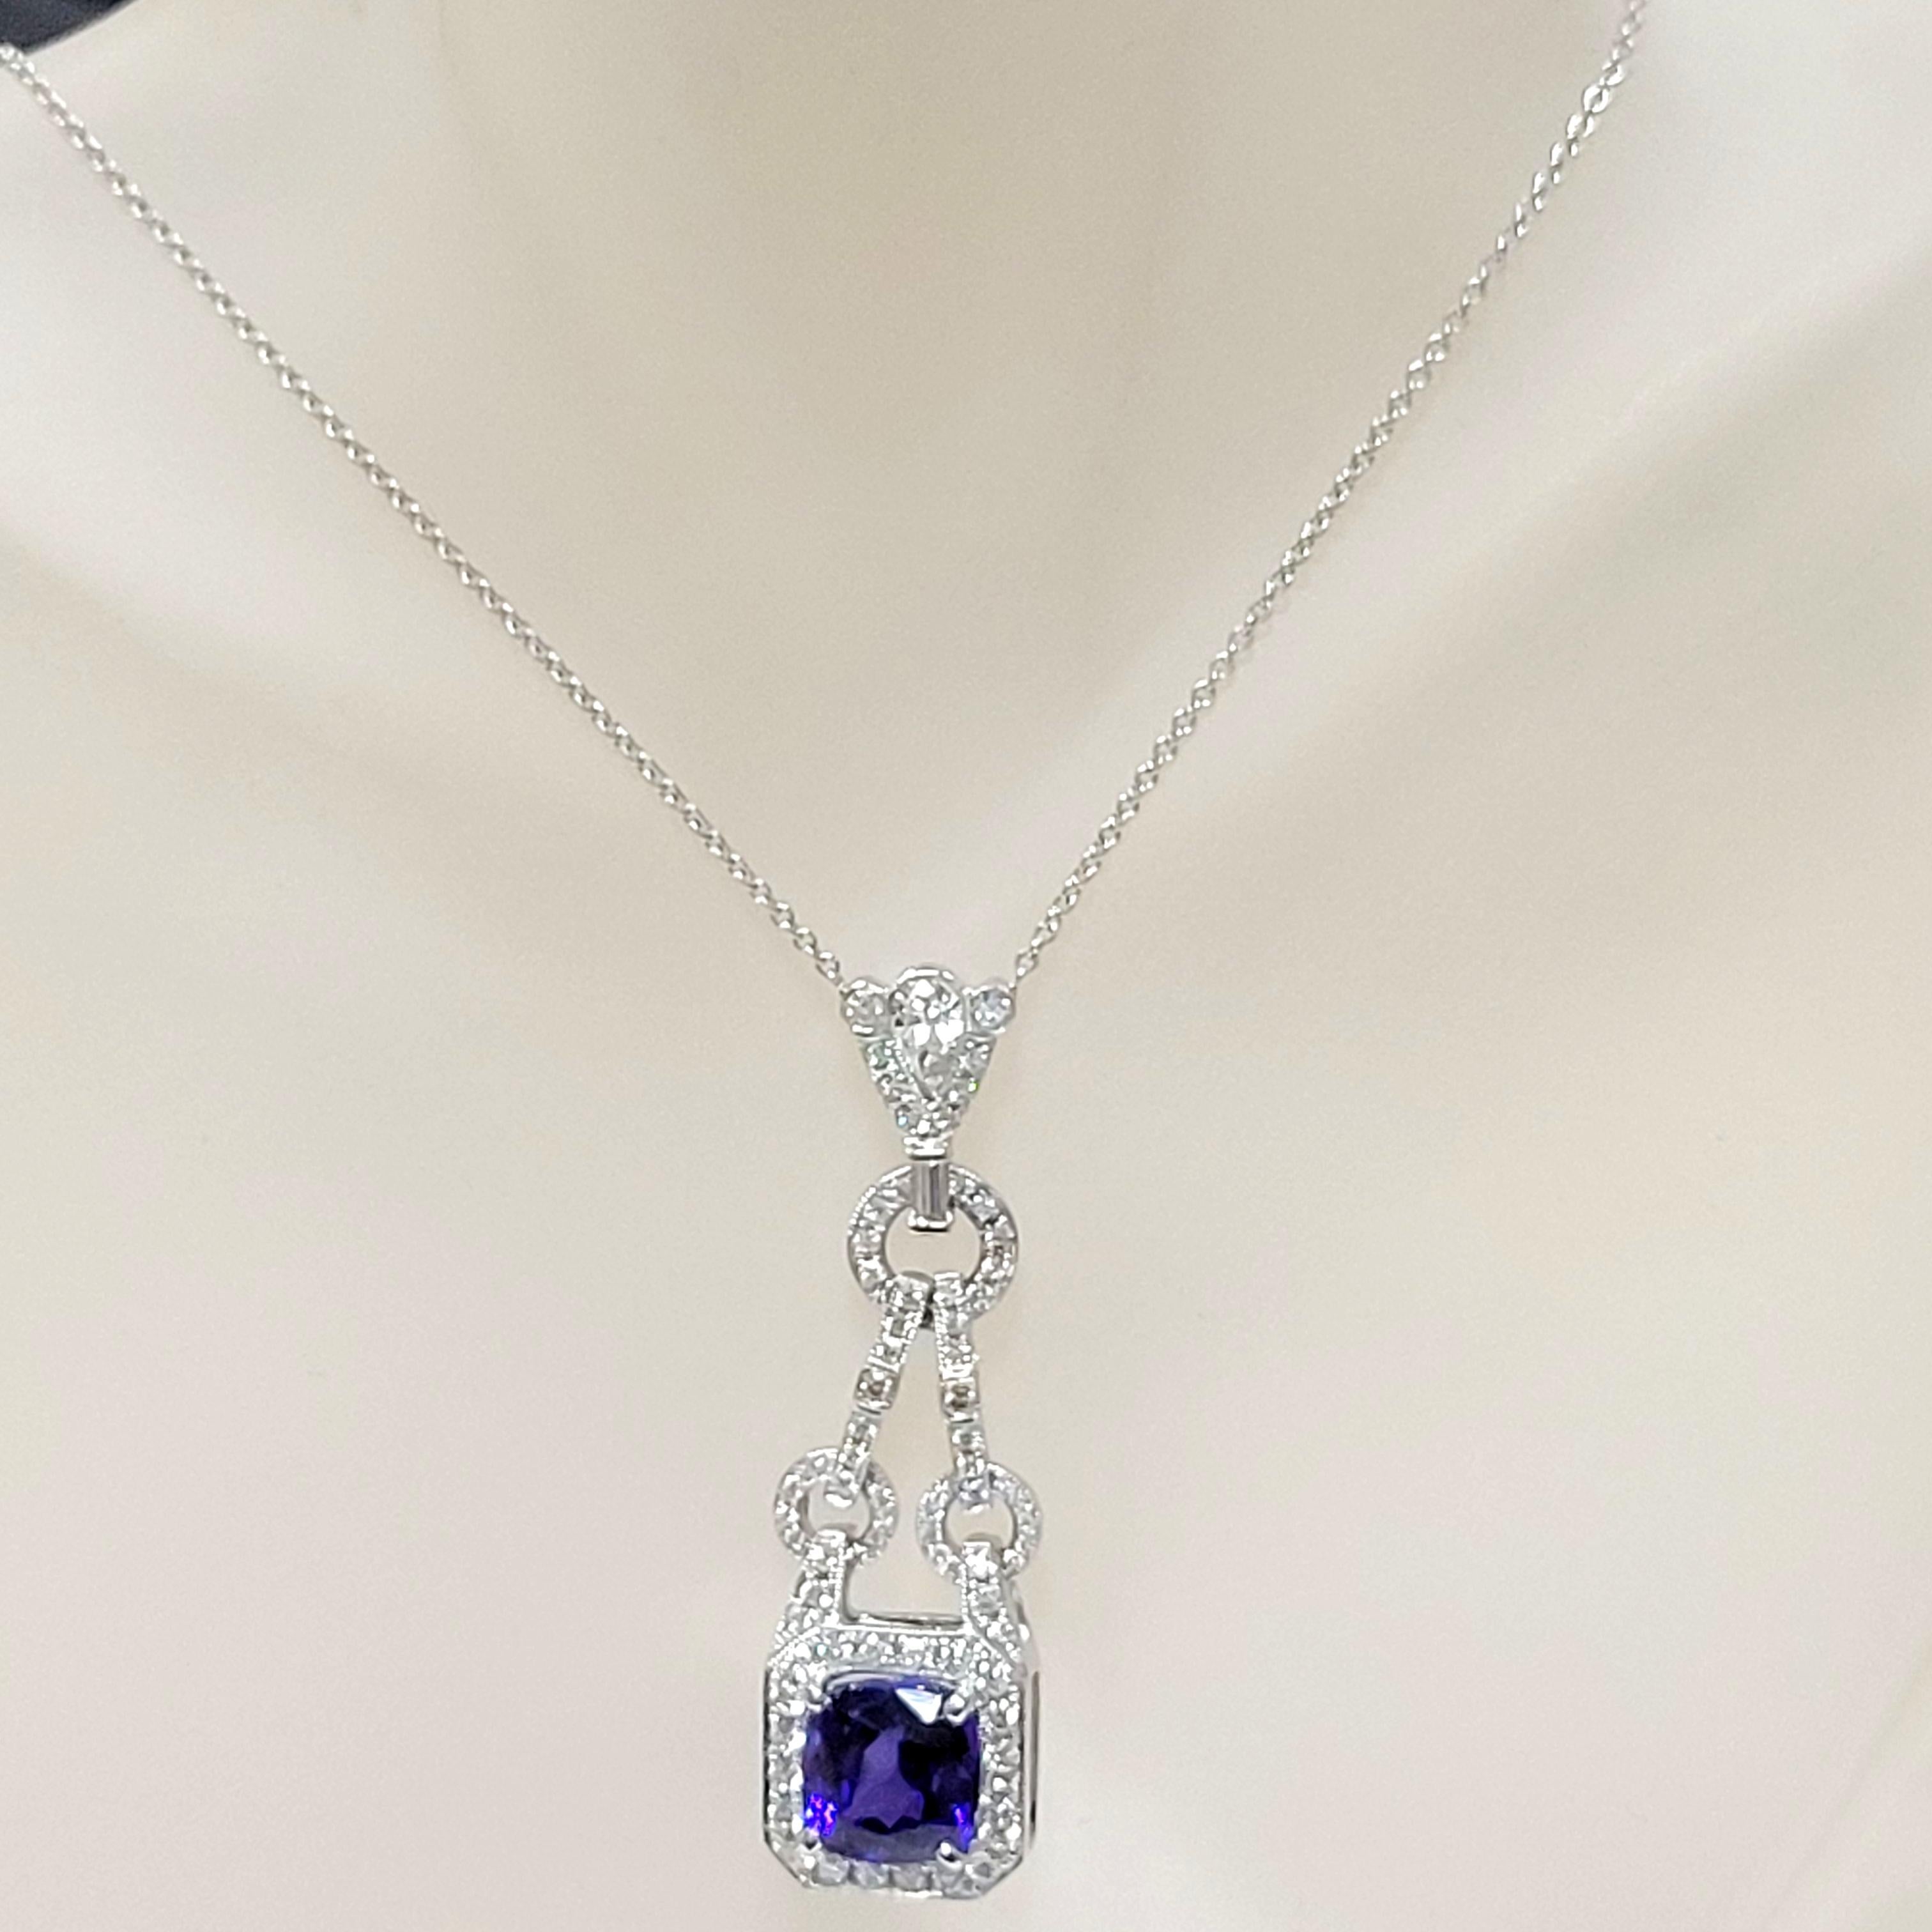 A beautiful color Cushion Shape Tanzanite sits in the center of a Beautiful  handcrafter antique design 14K Necklace pave set with 61 Perfectly matched Round Brilliant Diamonds, a 6.0x3.6 Pear shape diamond  and a 3.9x1.6 straight Baguette on its